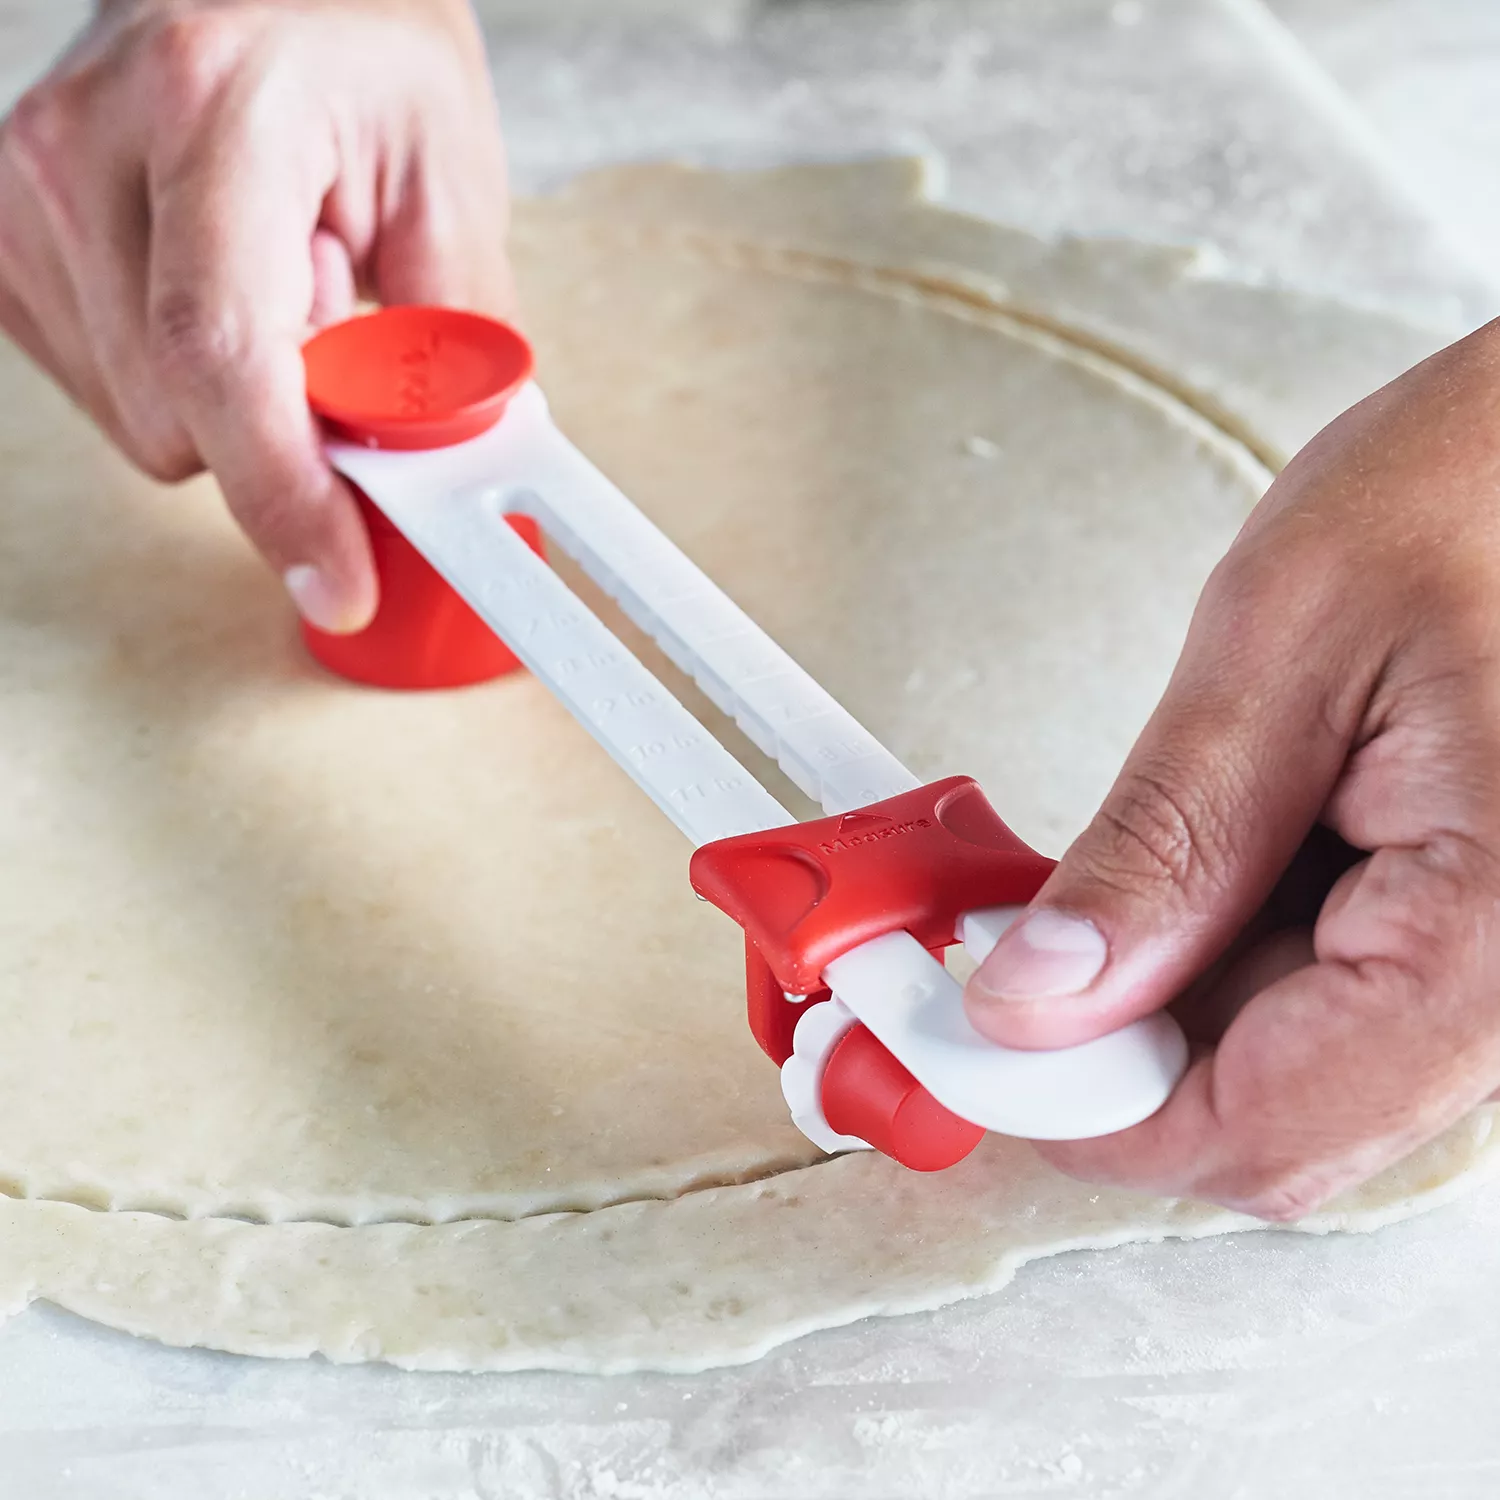 Tovolo Precision Pie Crust Cutter (Charcoal)